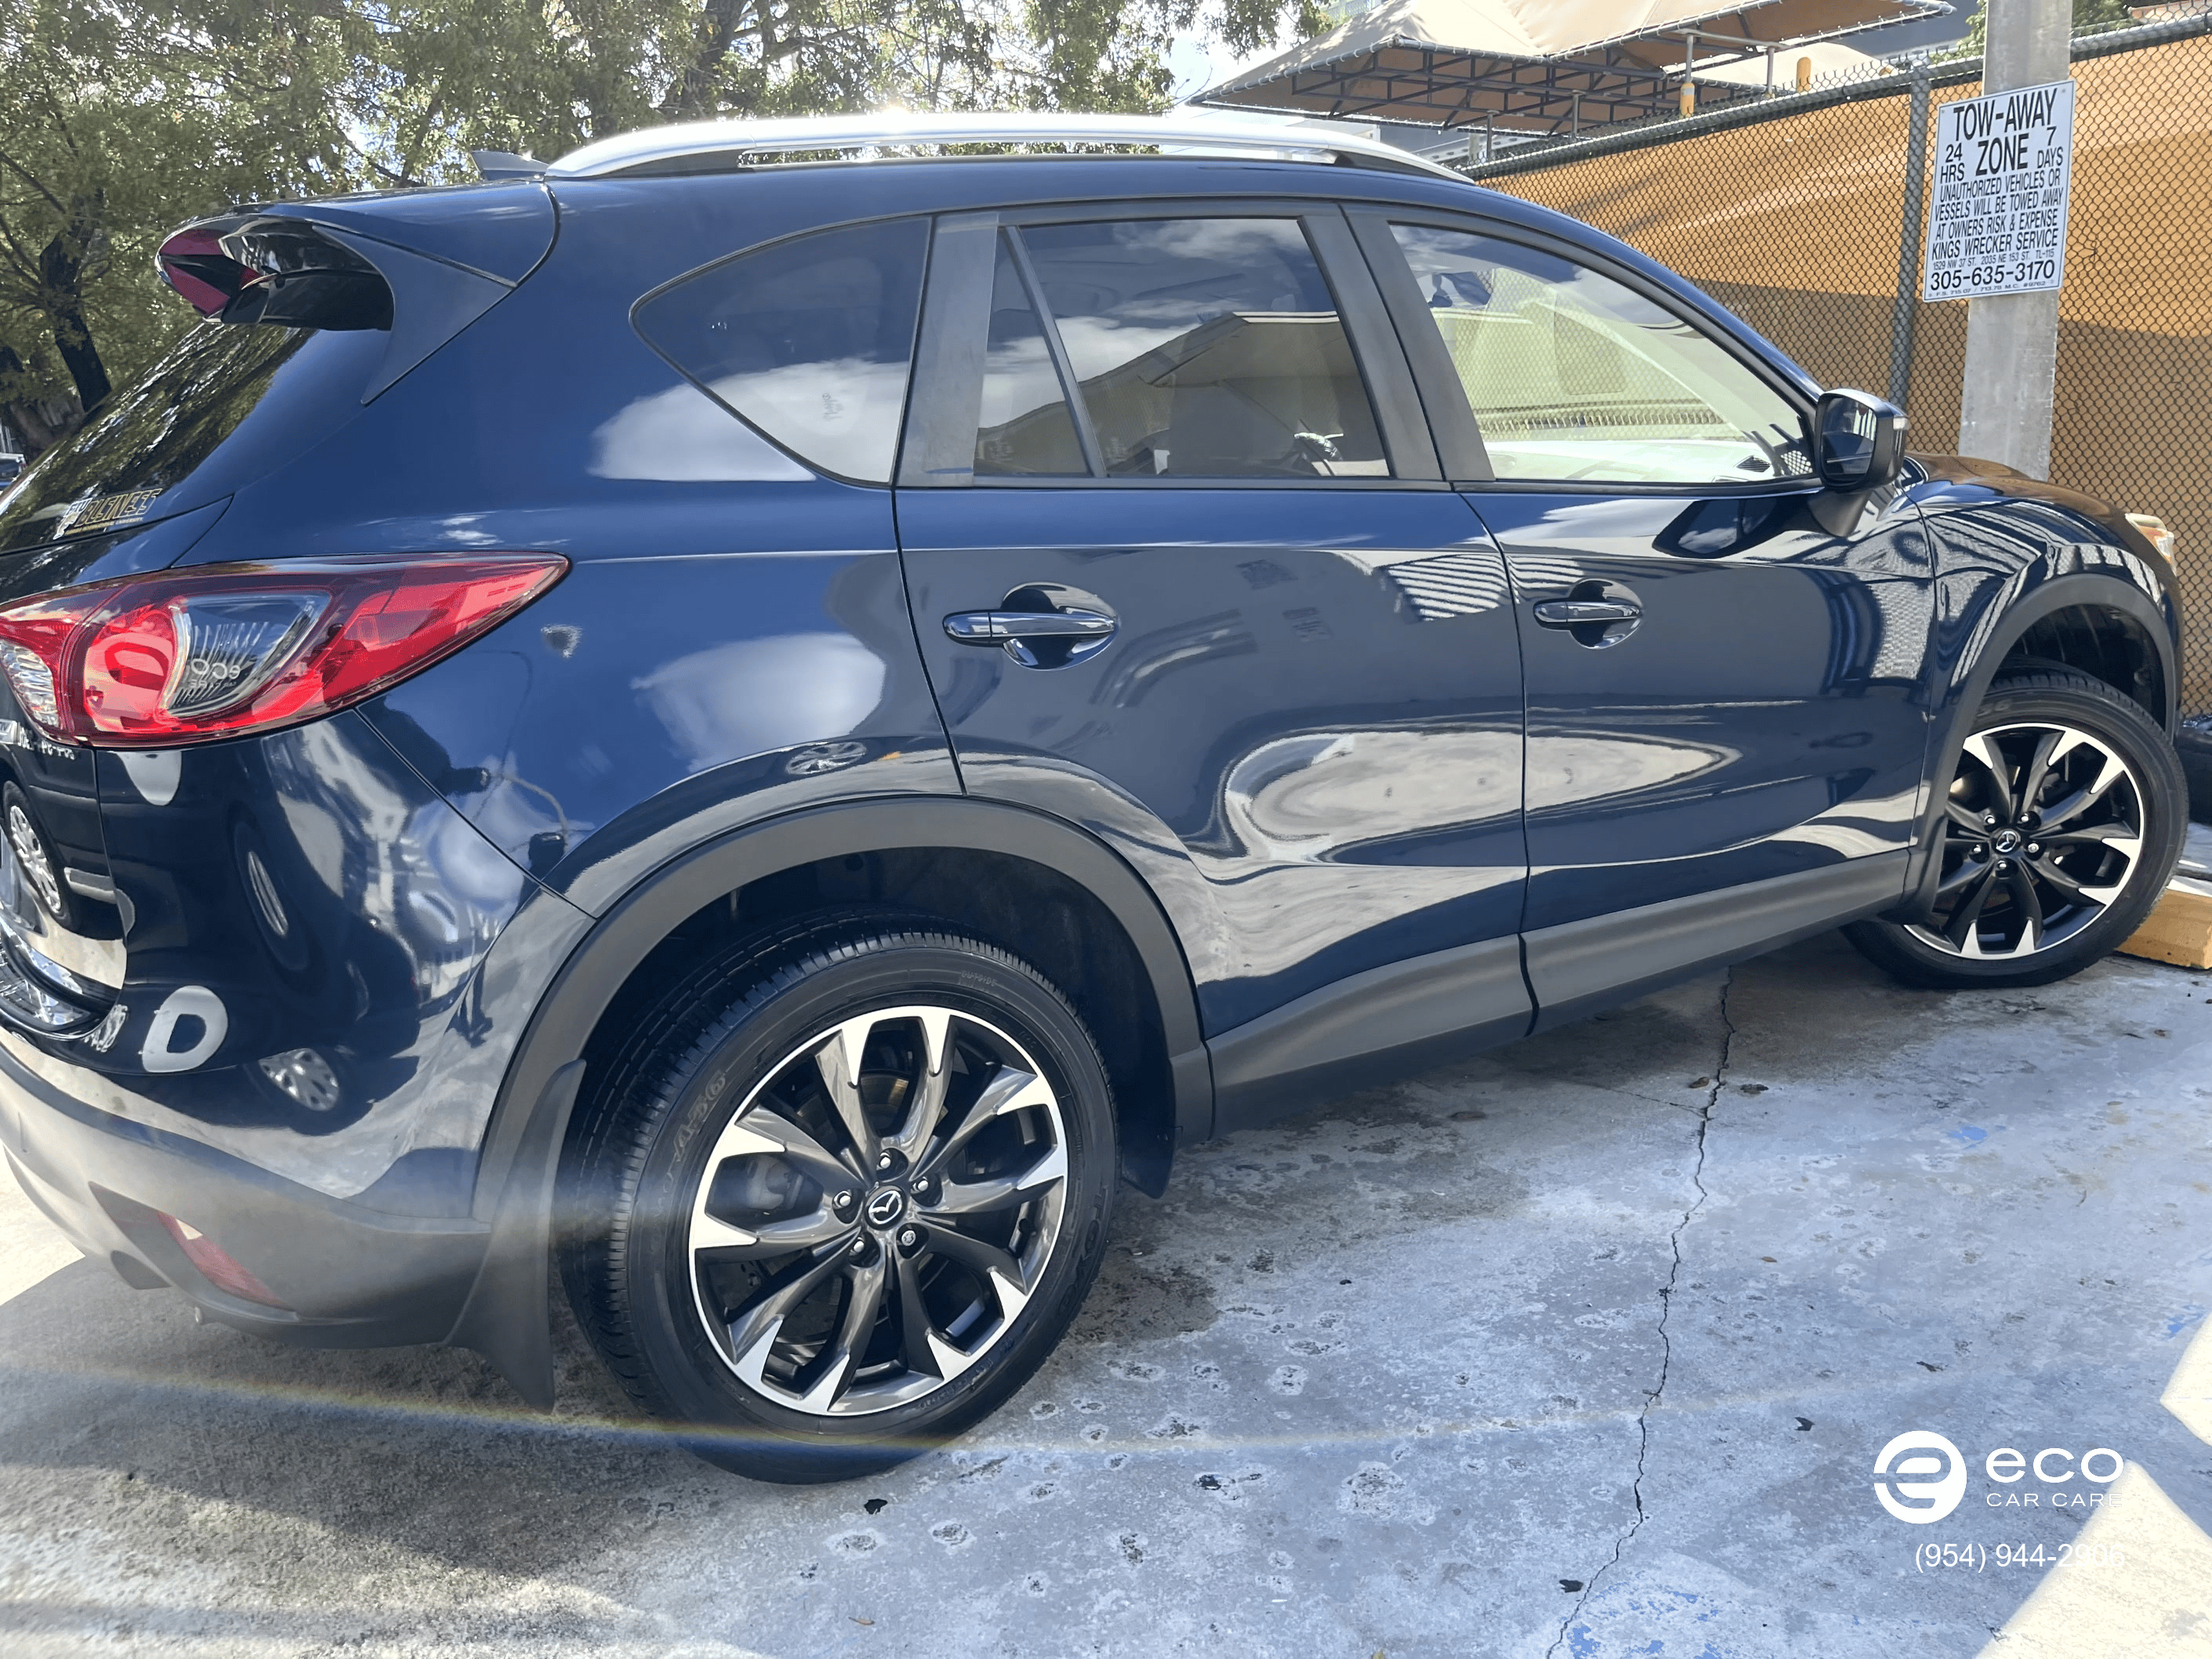 window tinting carbon film for suvs windshield